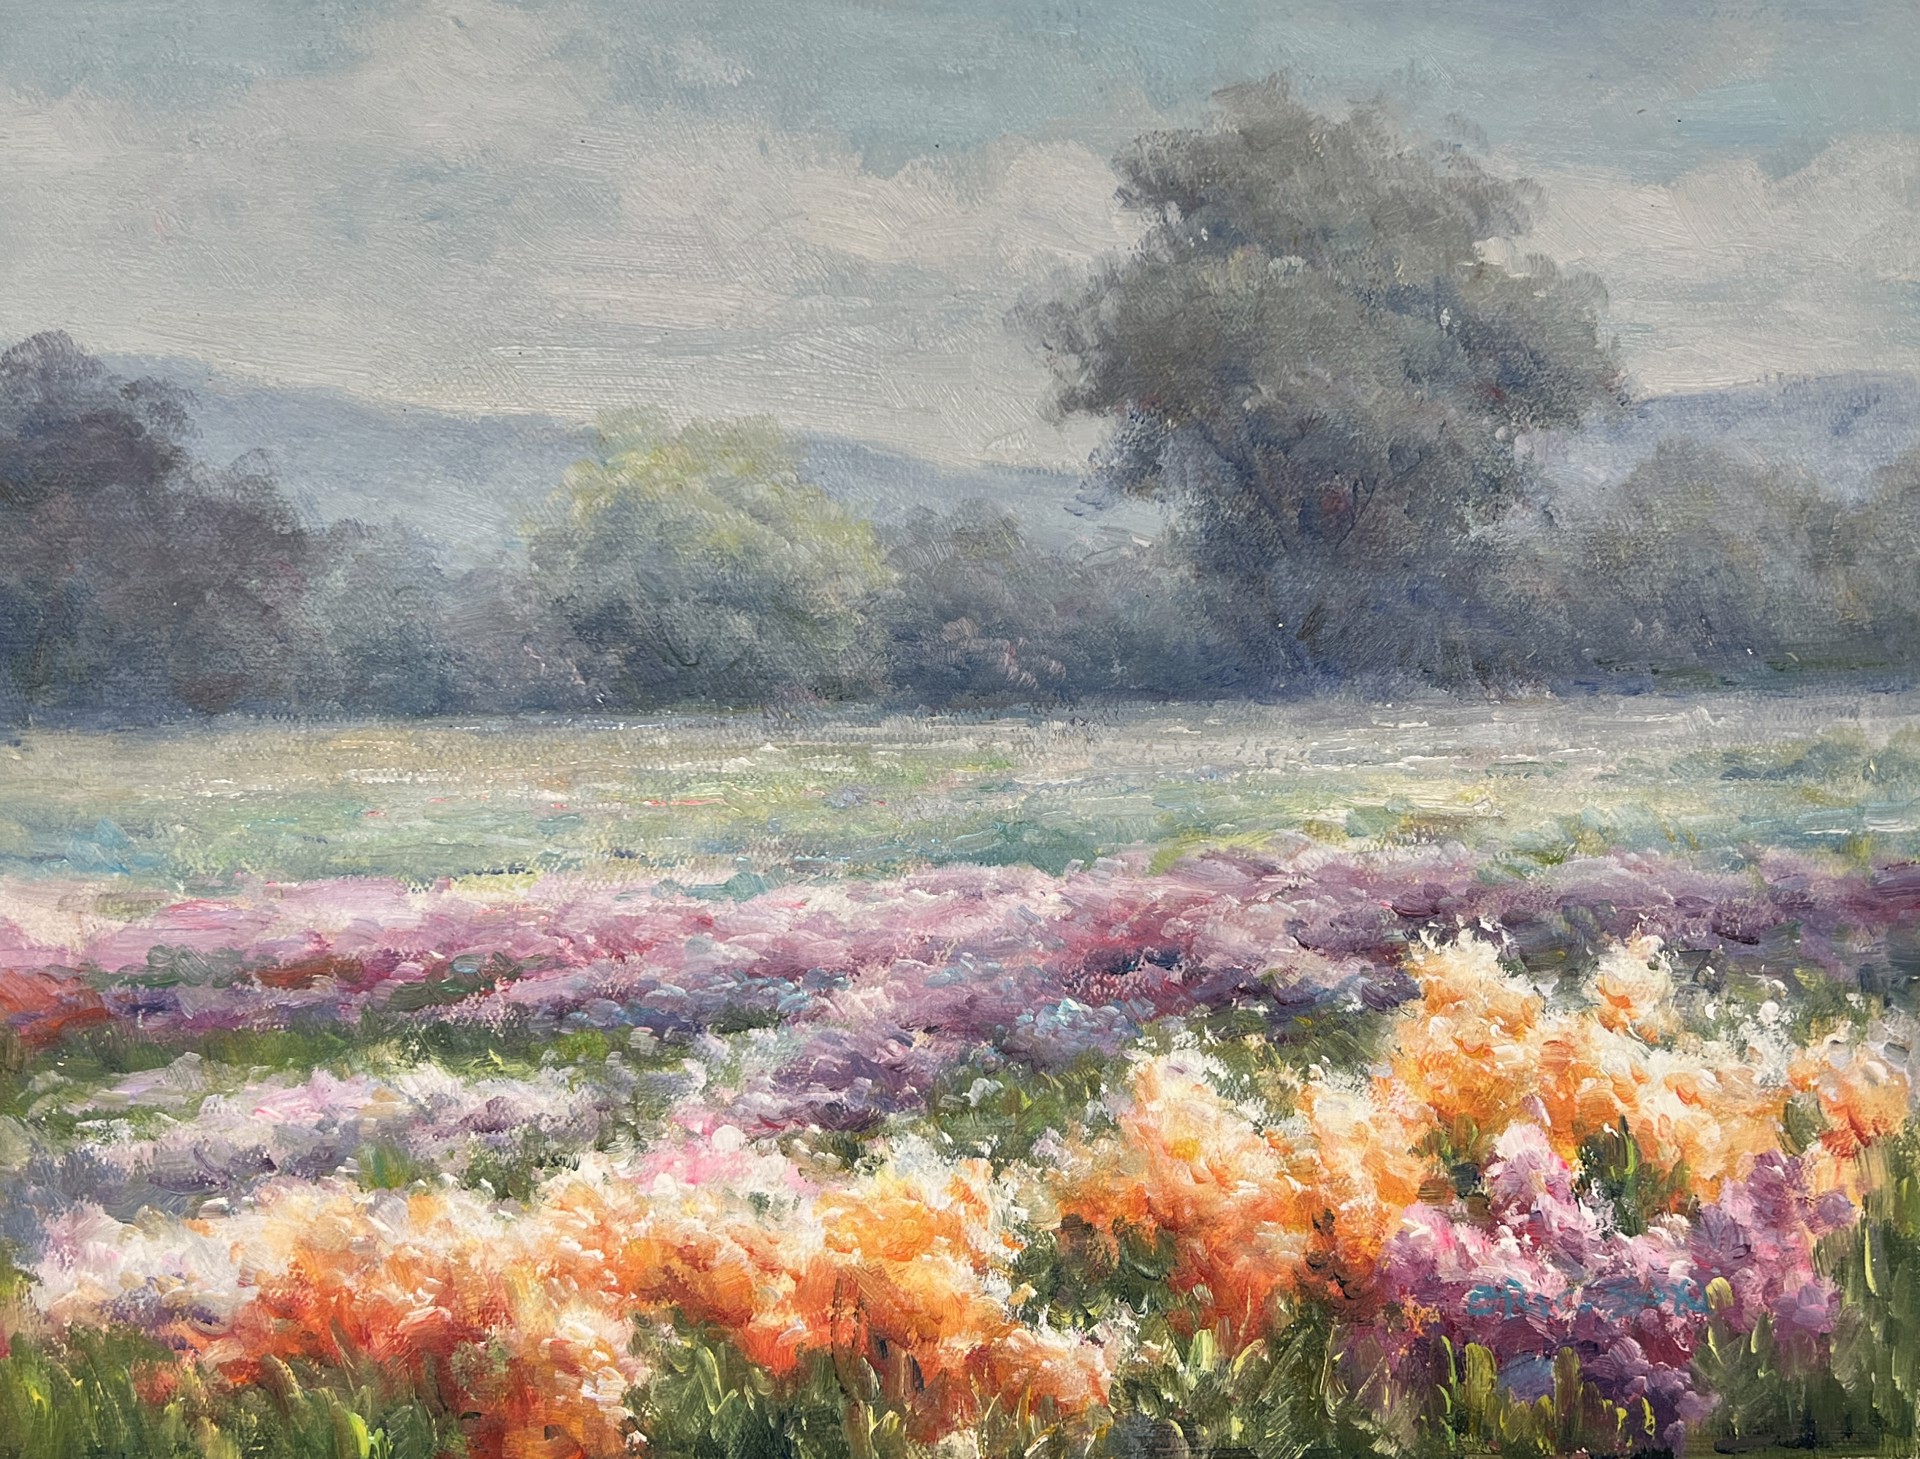 FLORAL MEADOW by ERIC SUN